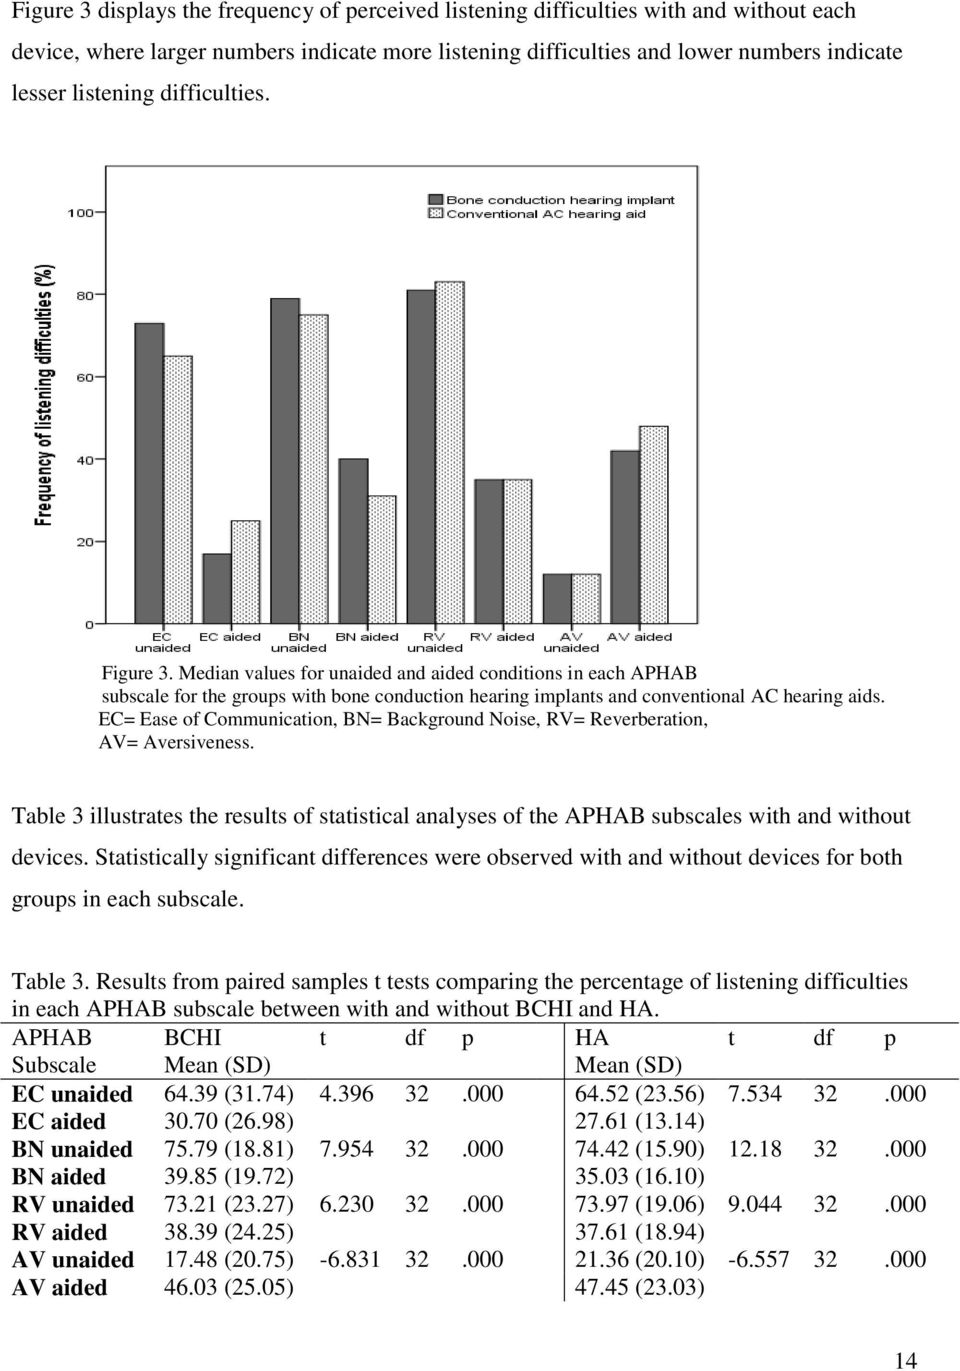 EC= Ease of Communication, BN= Background Noise, RV= Reverberation, AV= Aversiveness. Table 3 illustrates the results of statistical analyses of the APHAB subscales with and without devices.